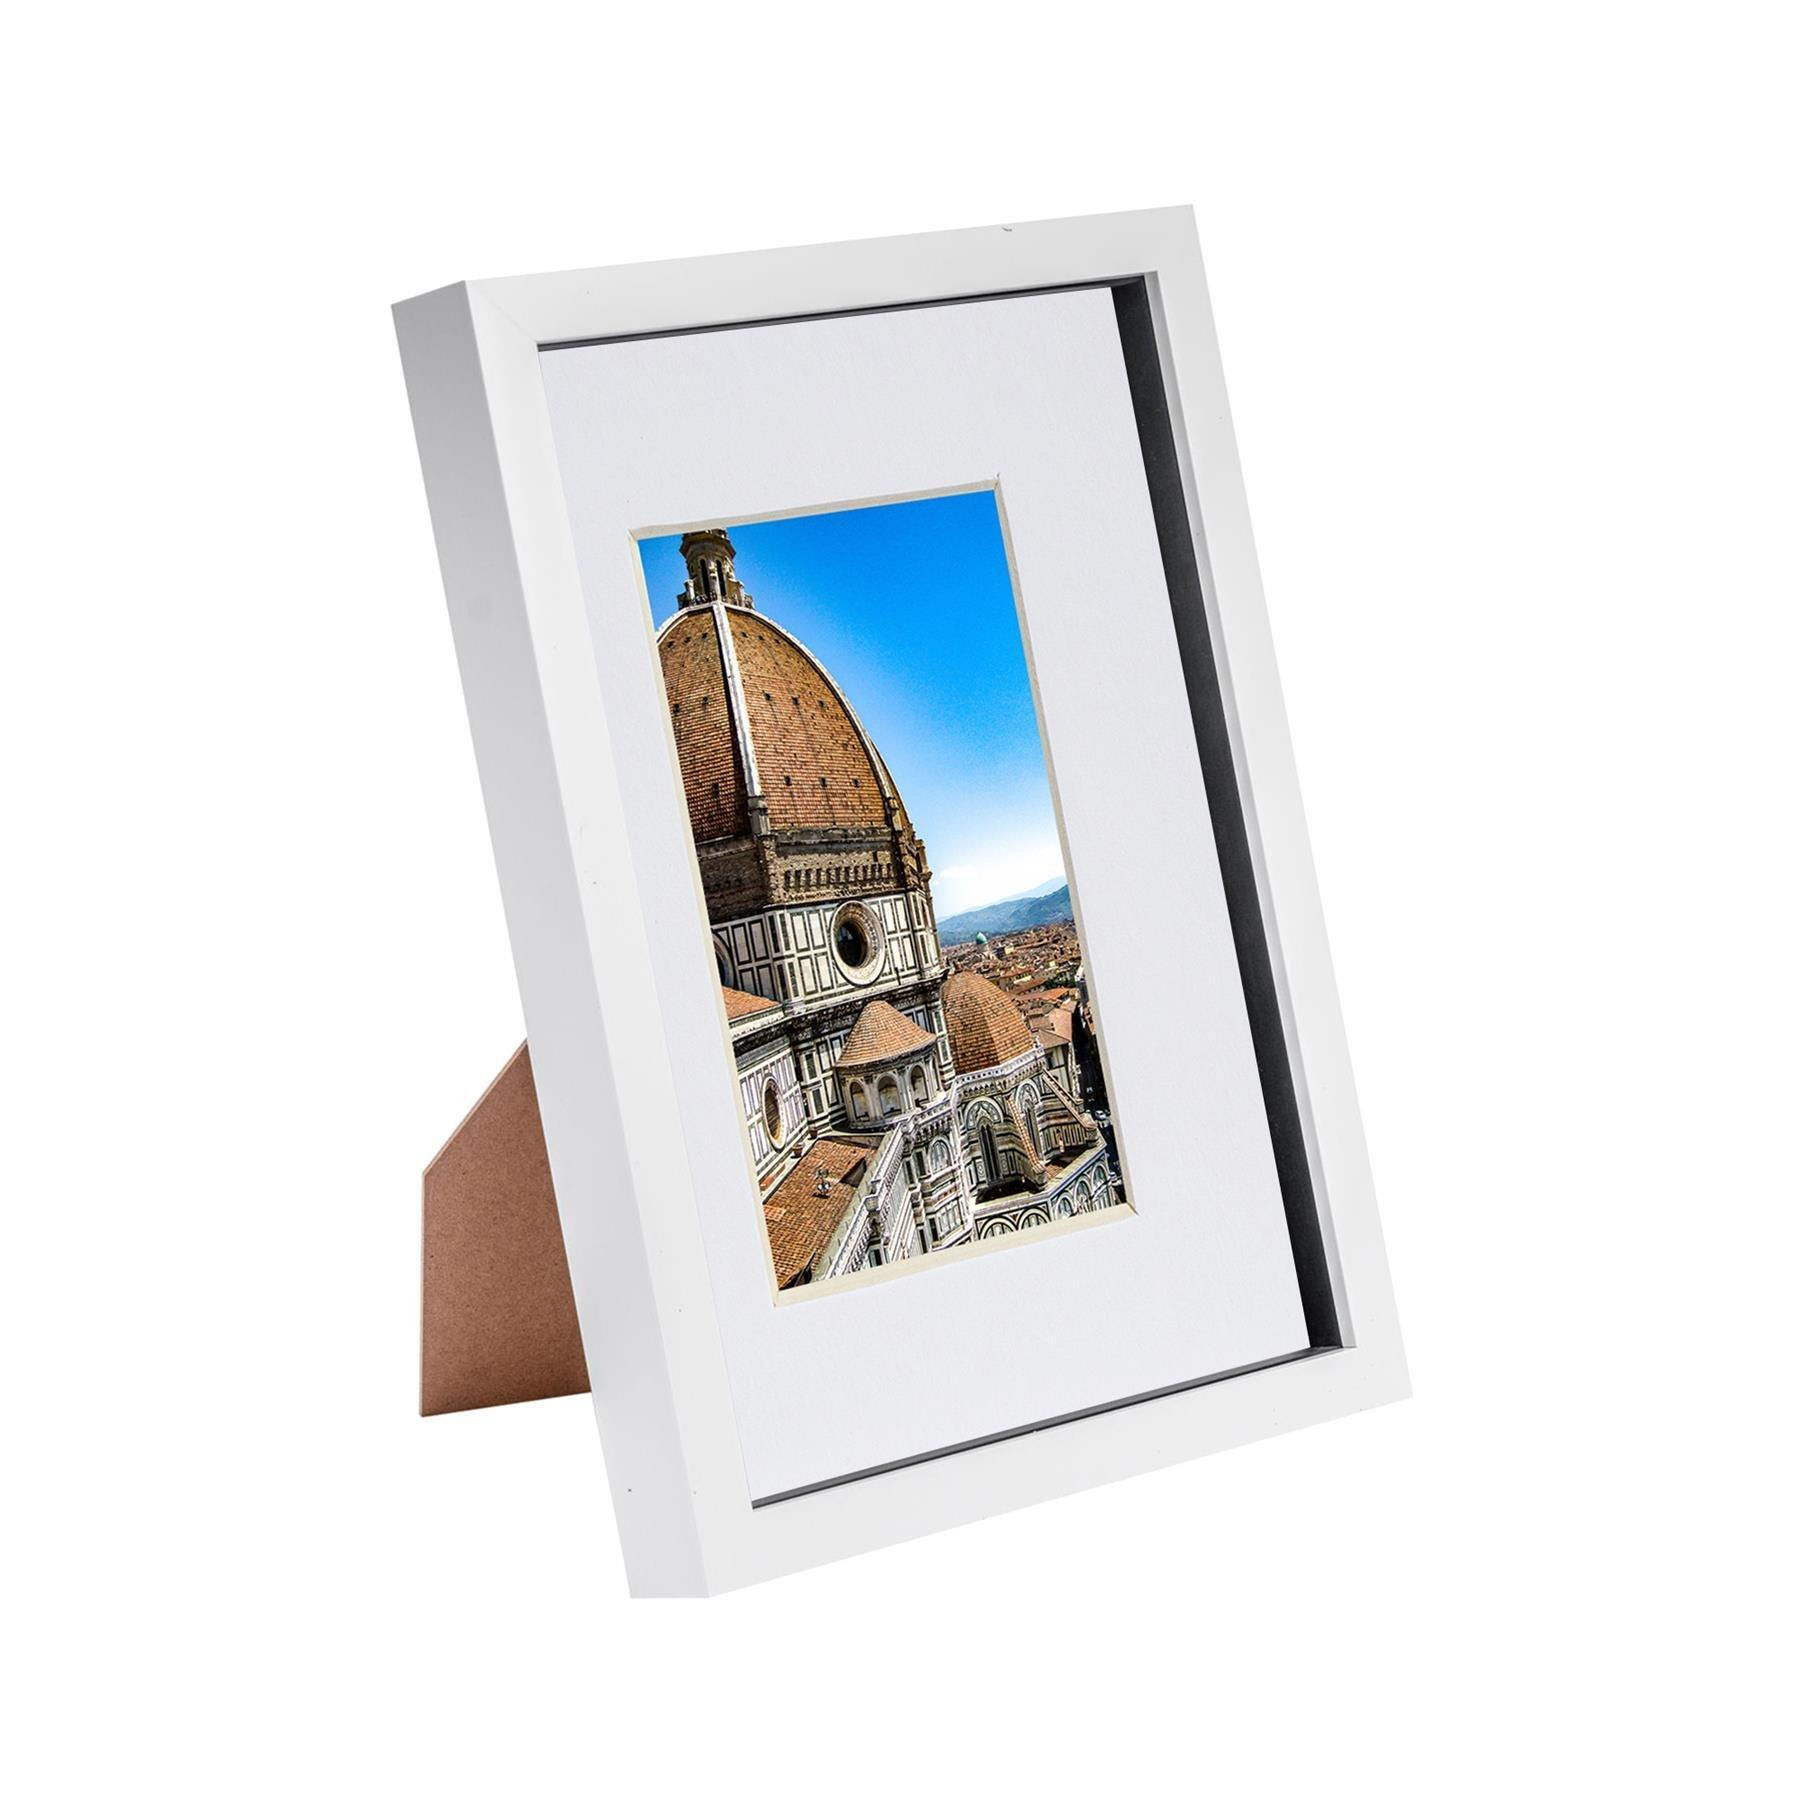 "8x12"" 3D Box Photo Frame with A5 Mount 6x8""" - image 1